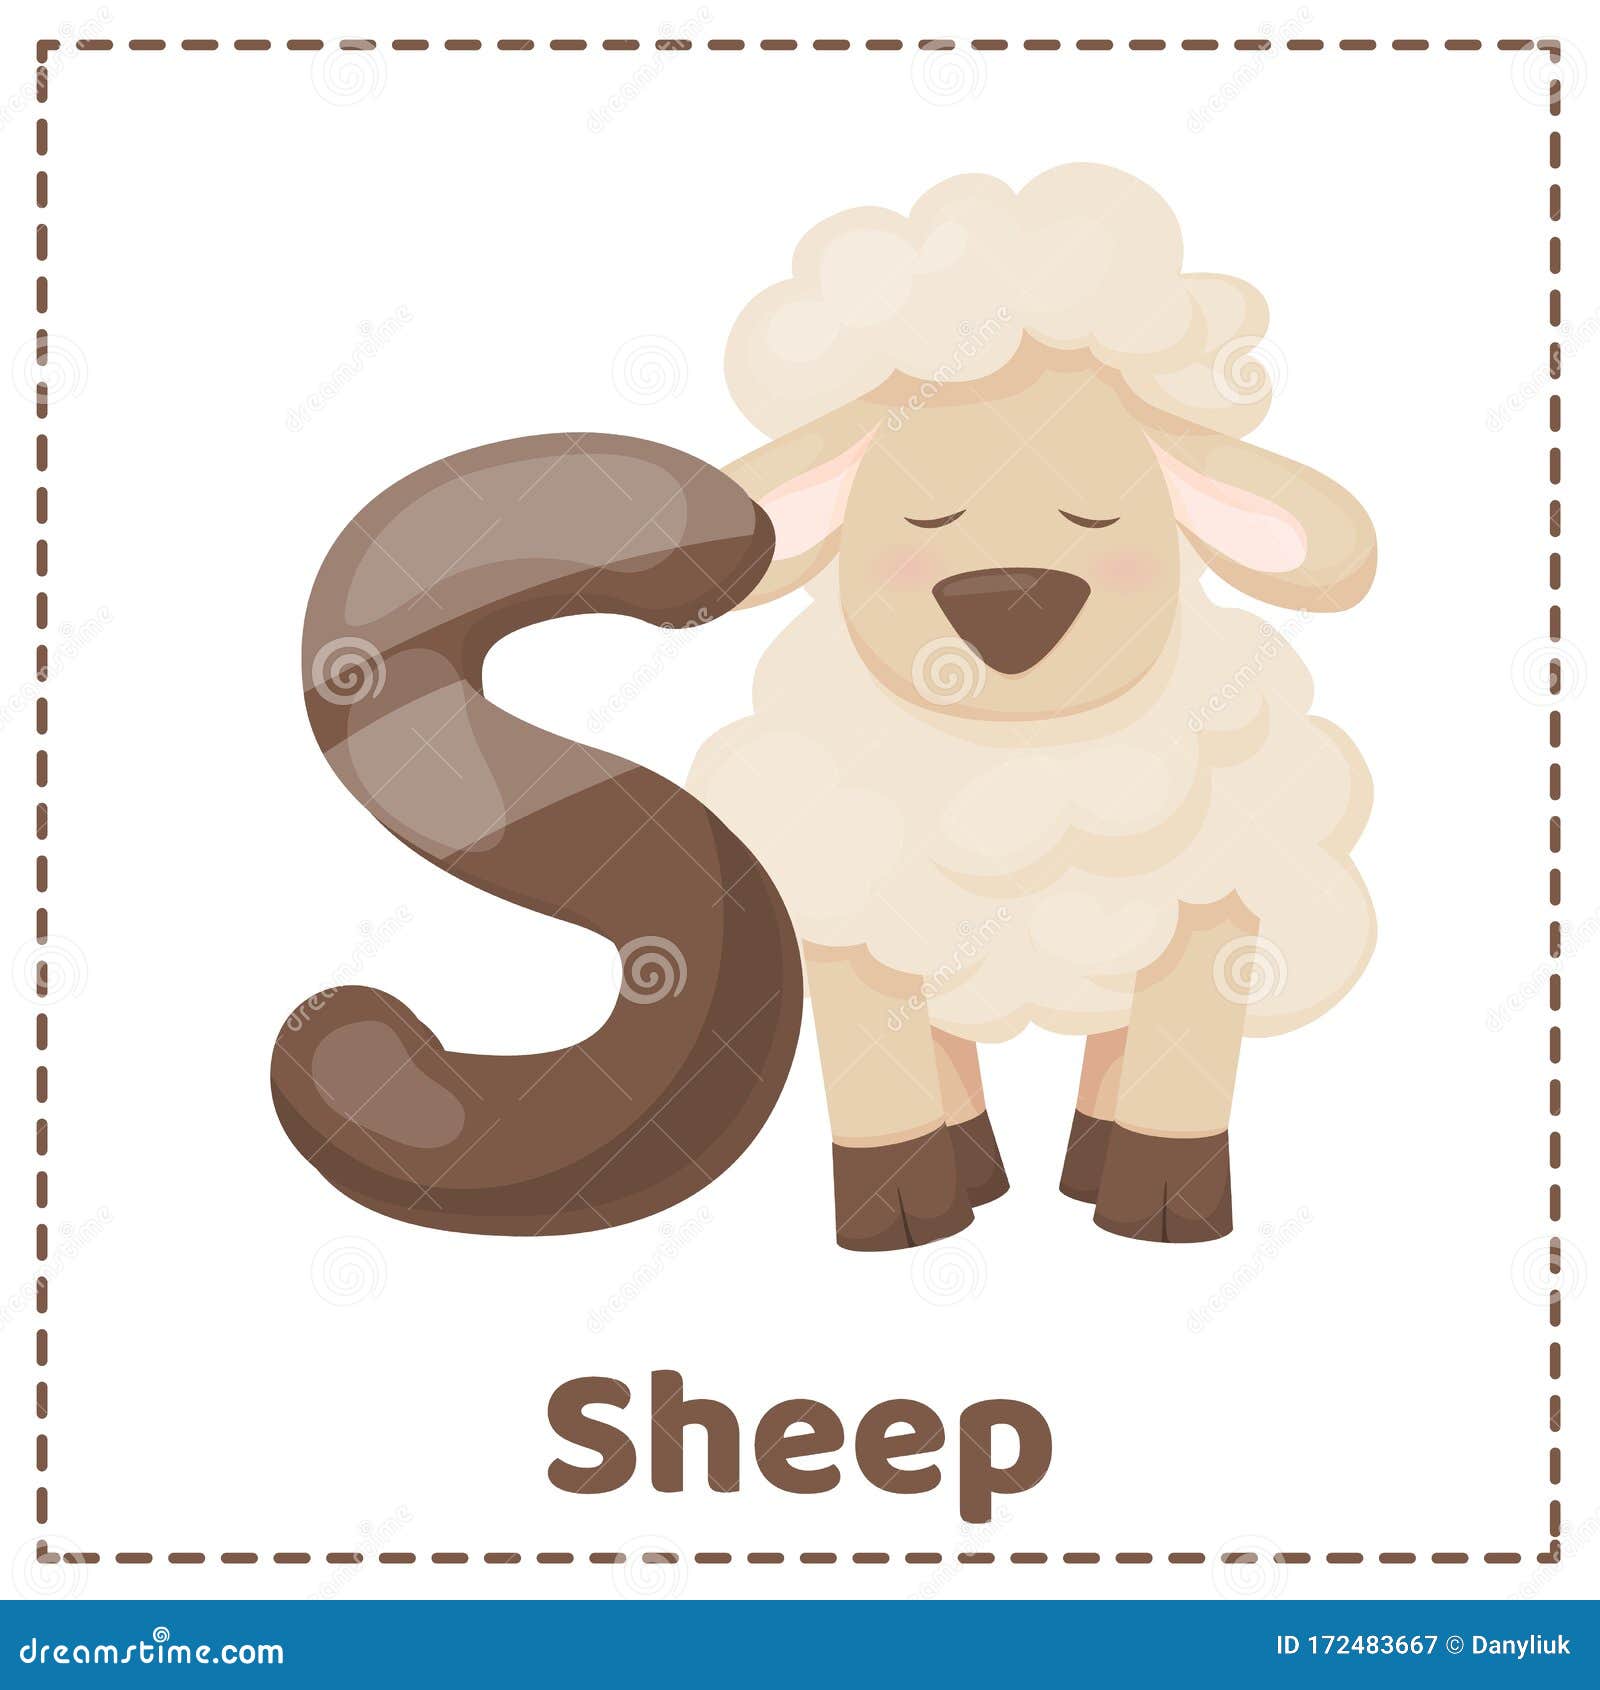 alphabet printable flashcards with letter s stock illustration